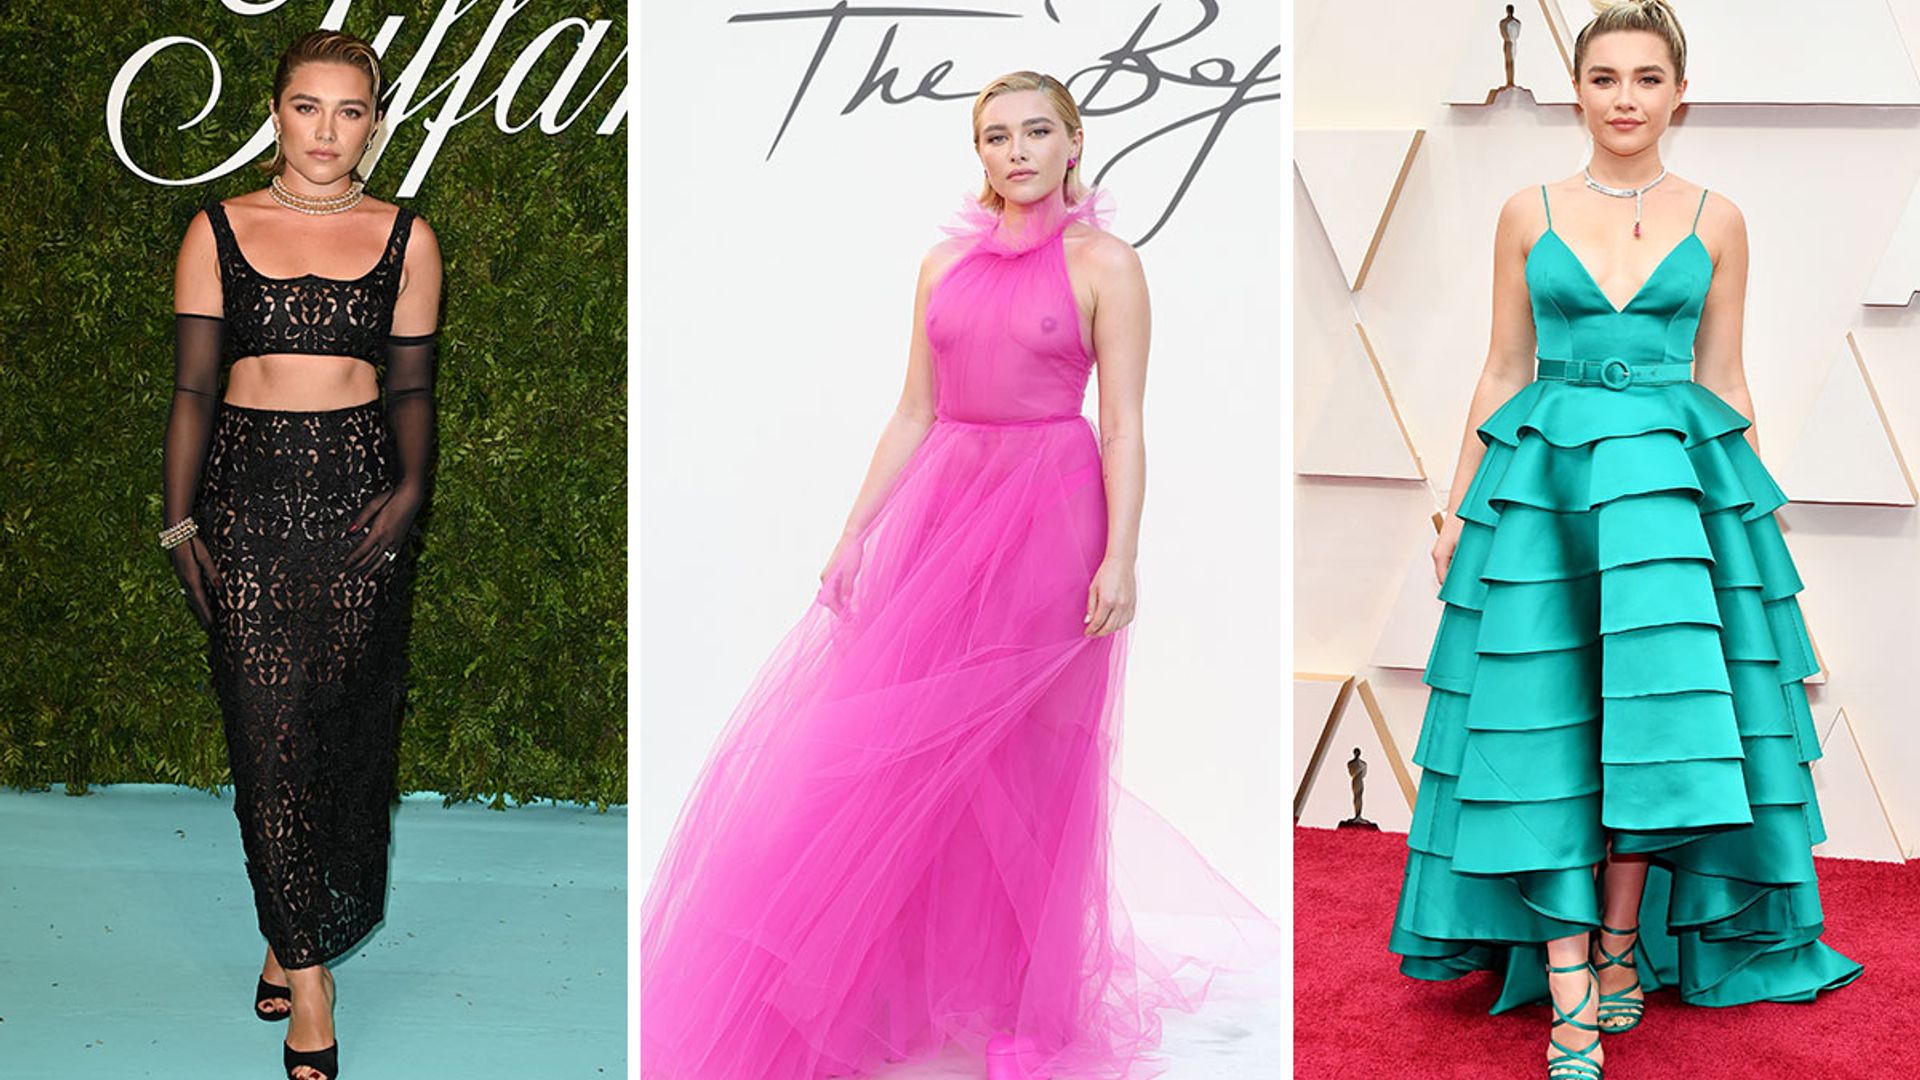 3. Florence Pugh's Best Blonde Hair Moments on the Red Carpet - wide 4